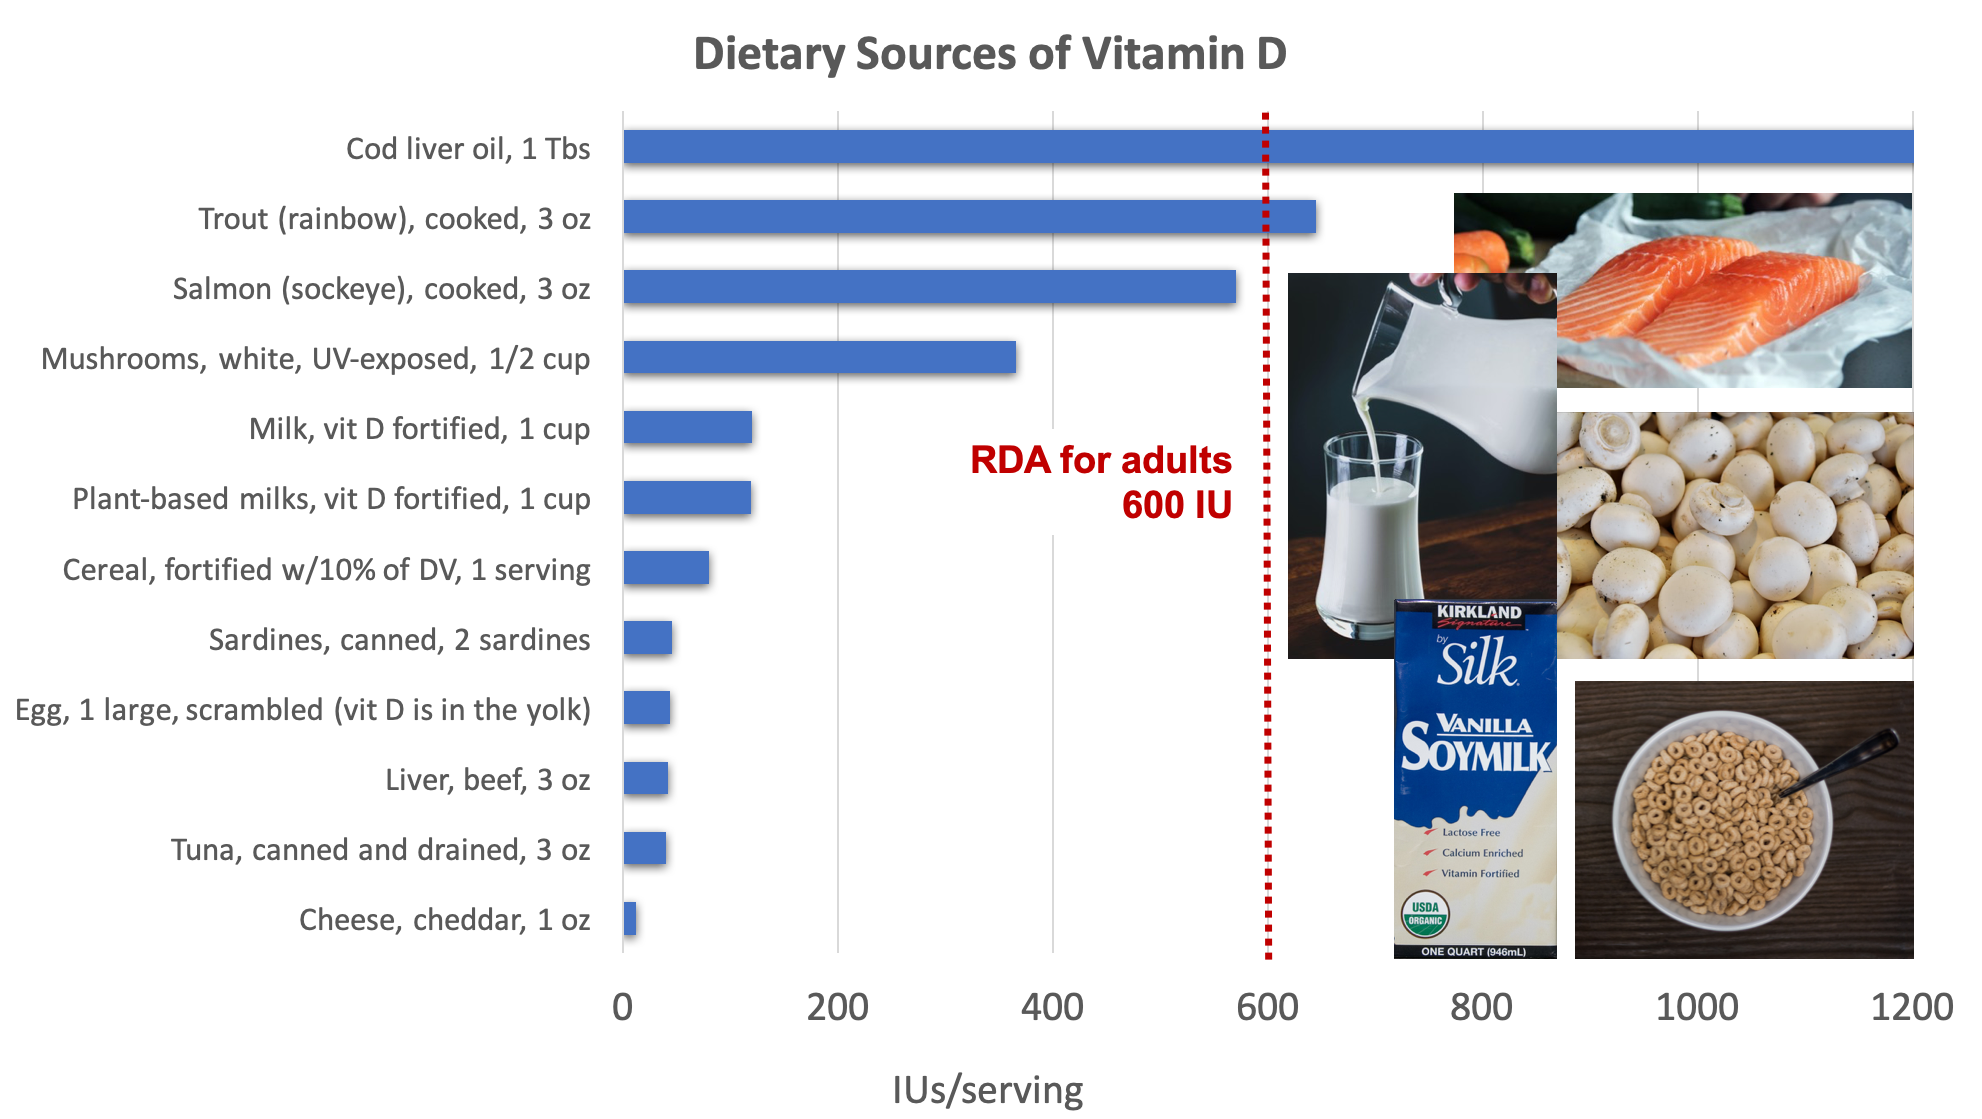 Bar graph showing dietary sources of vitamin D compared with the RDA for adults of 600 IU. Top sources include cod liver oil, trout, salmon, mushrooms, and fortified milk, plant-based milk and cereal. Food sources pictured include salmon, milk, soy milk, mushrooms, and fortified cereal.